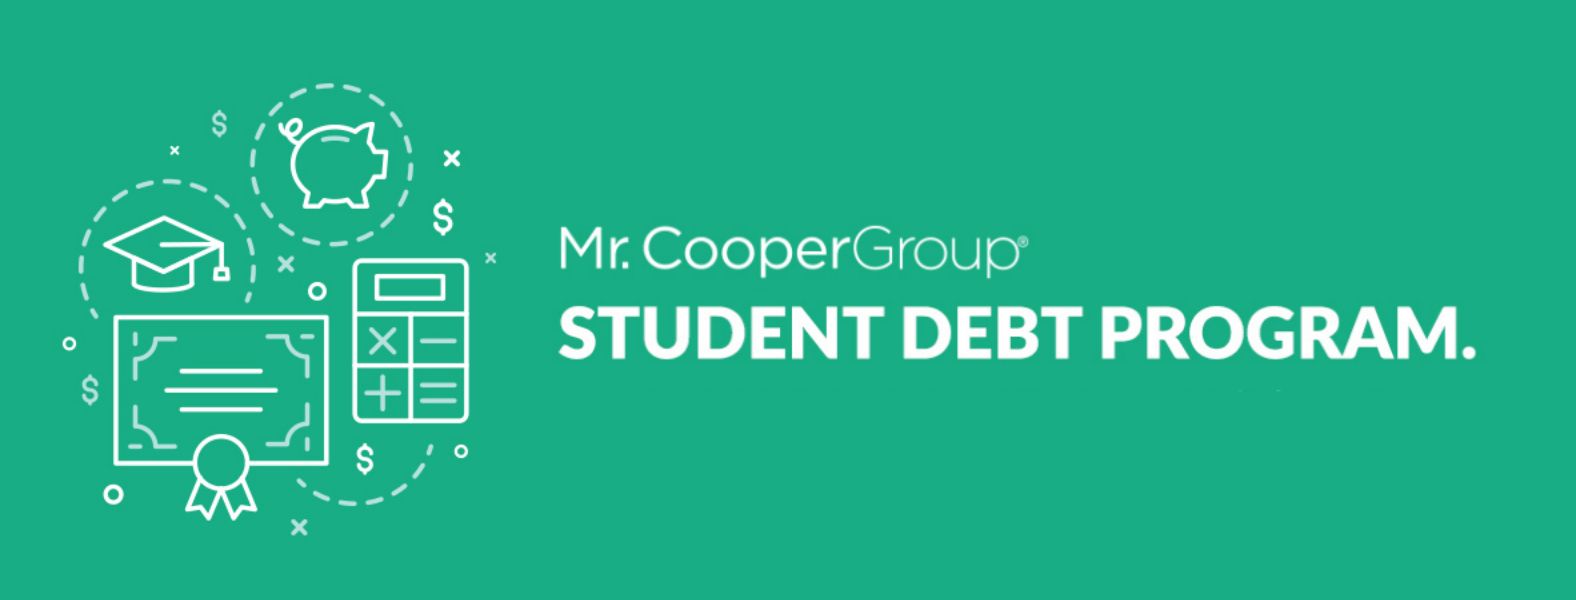 Graphic with icons including a piggy bank, graduation cap, diploma, a calculator, and text: Mr. Cooper Group, Student Debt Program